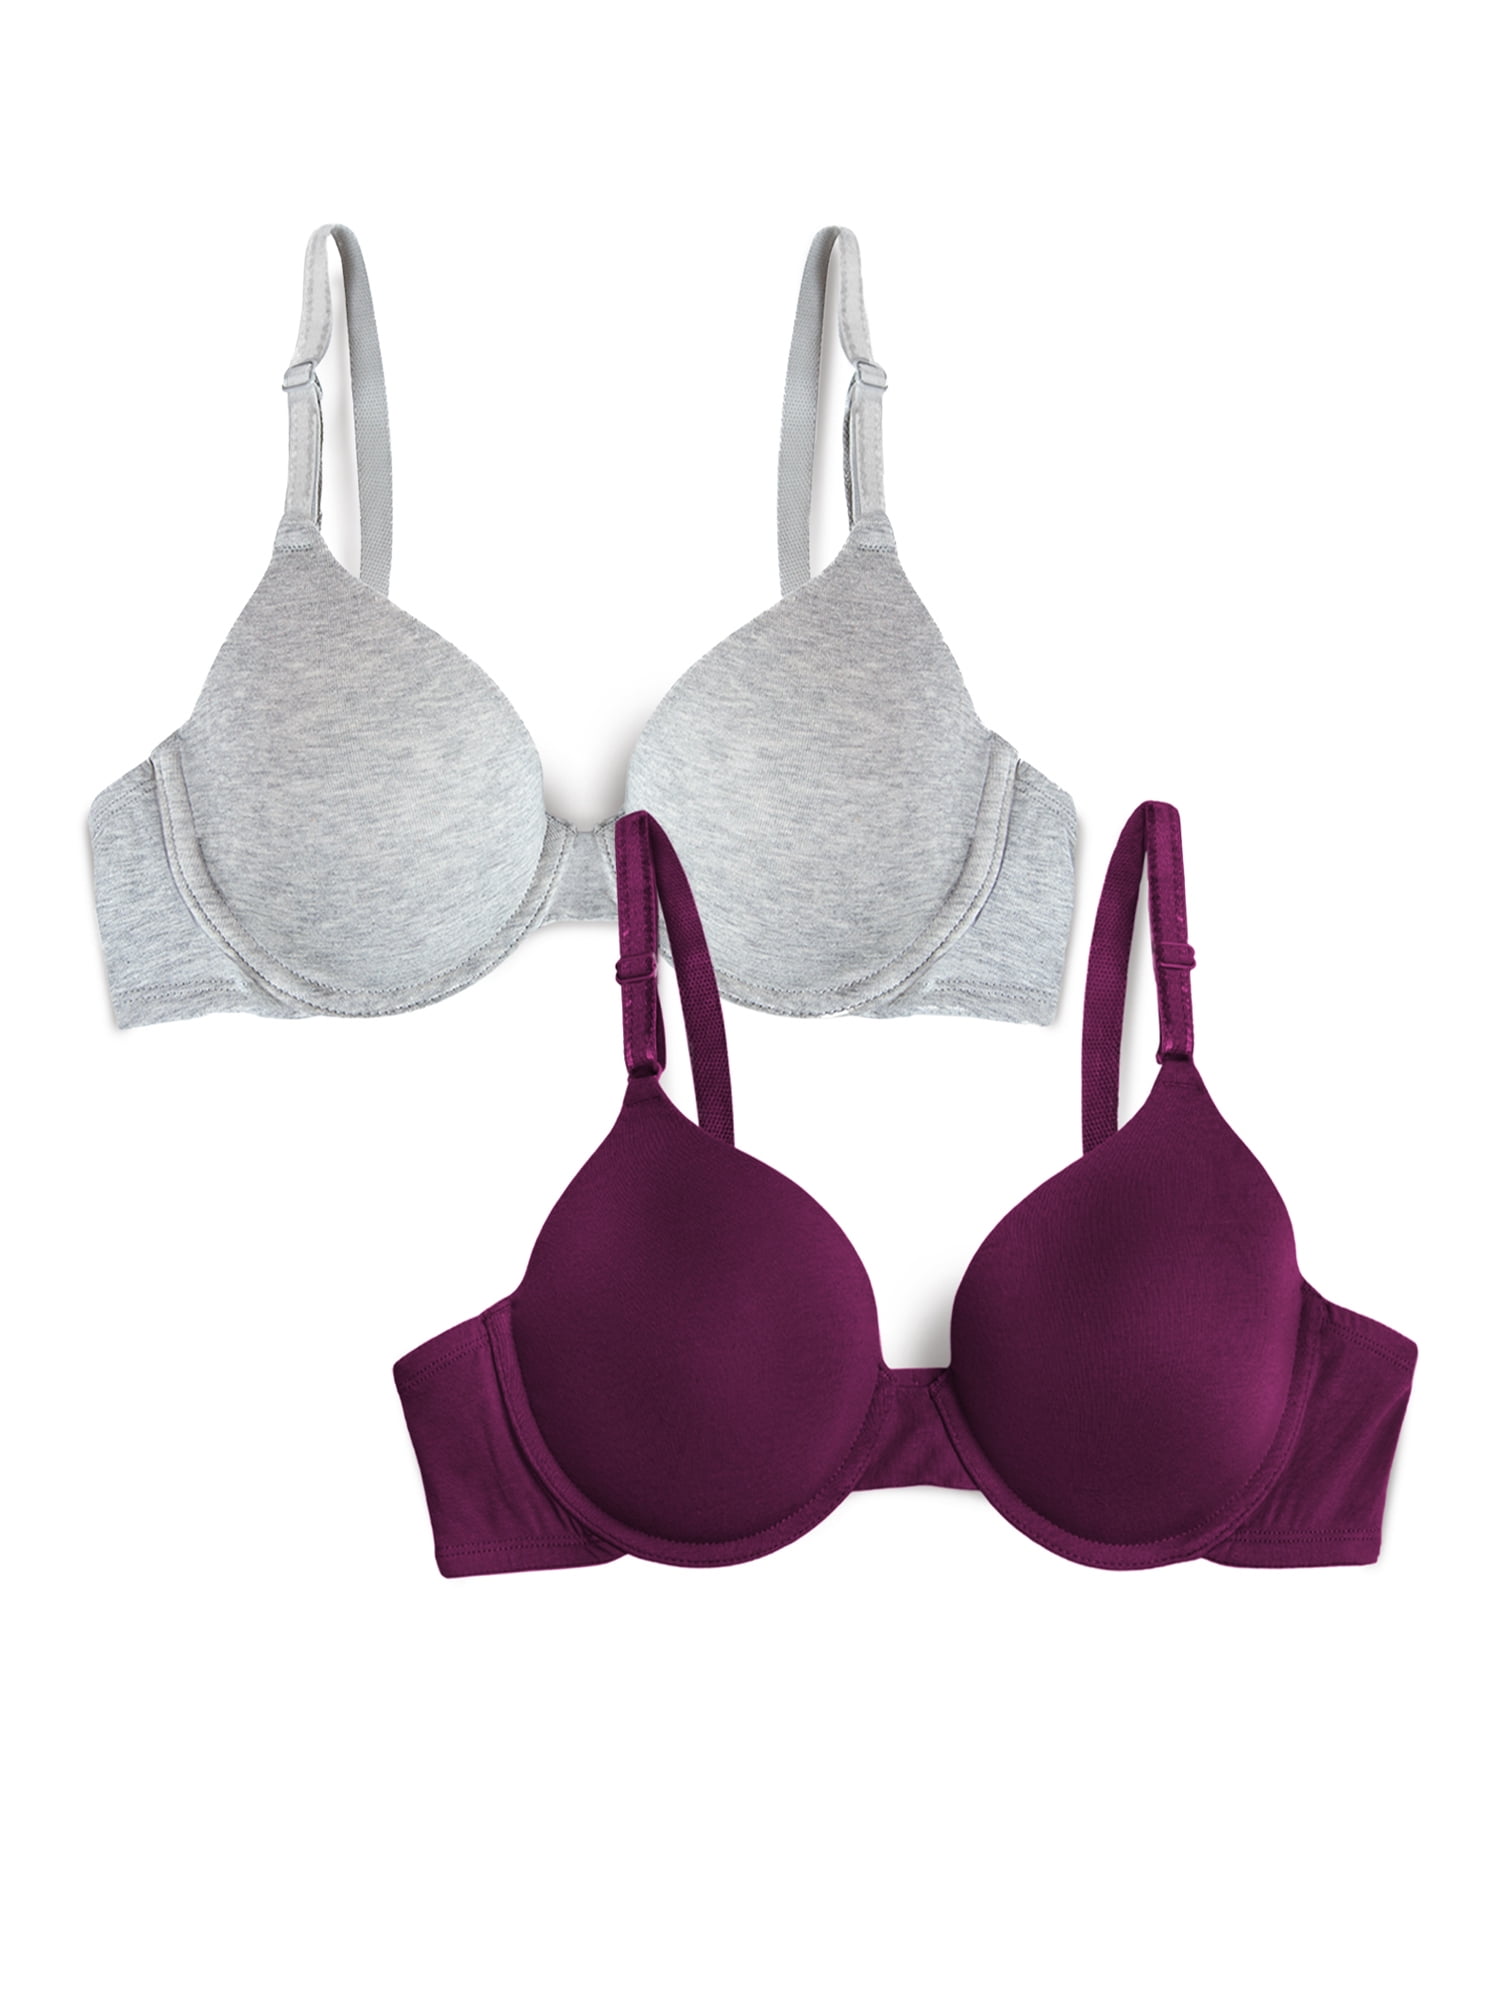 Fruit of the Loom T-Shirt Bra 2 Pack, Style FT938, Sizes M to XXL